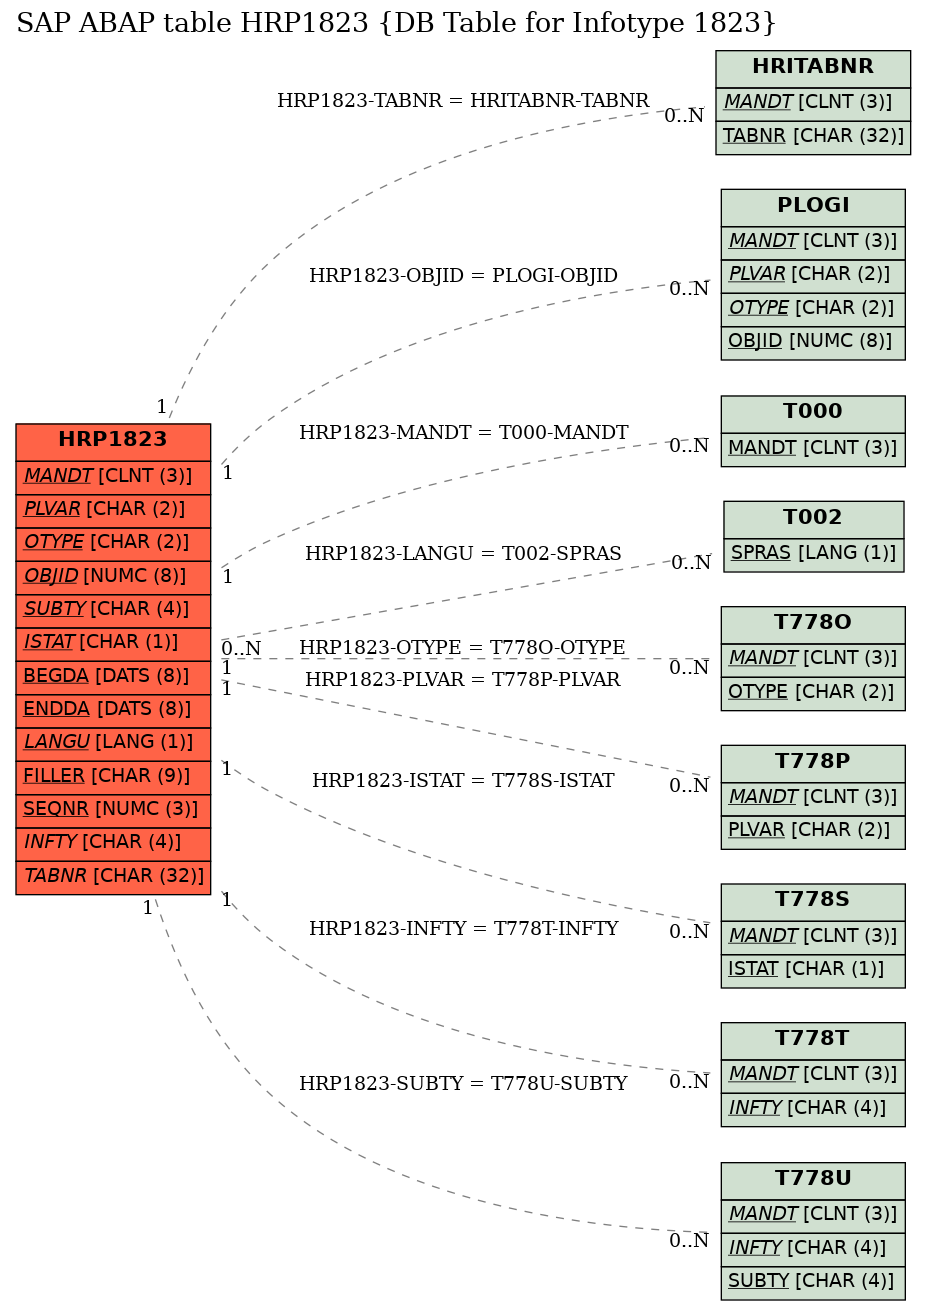 E-R Diagram for table HRP1823 (DB Table for Infotype 1823)